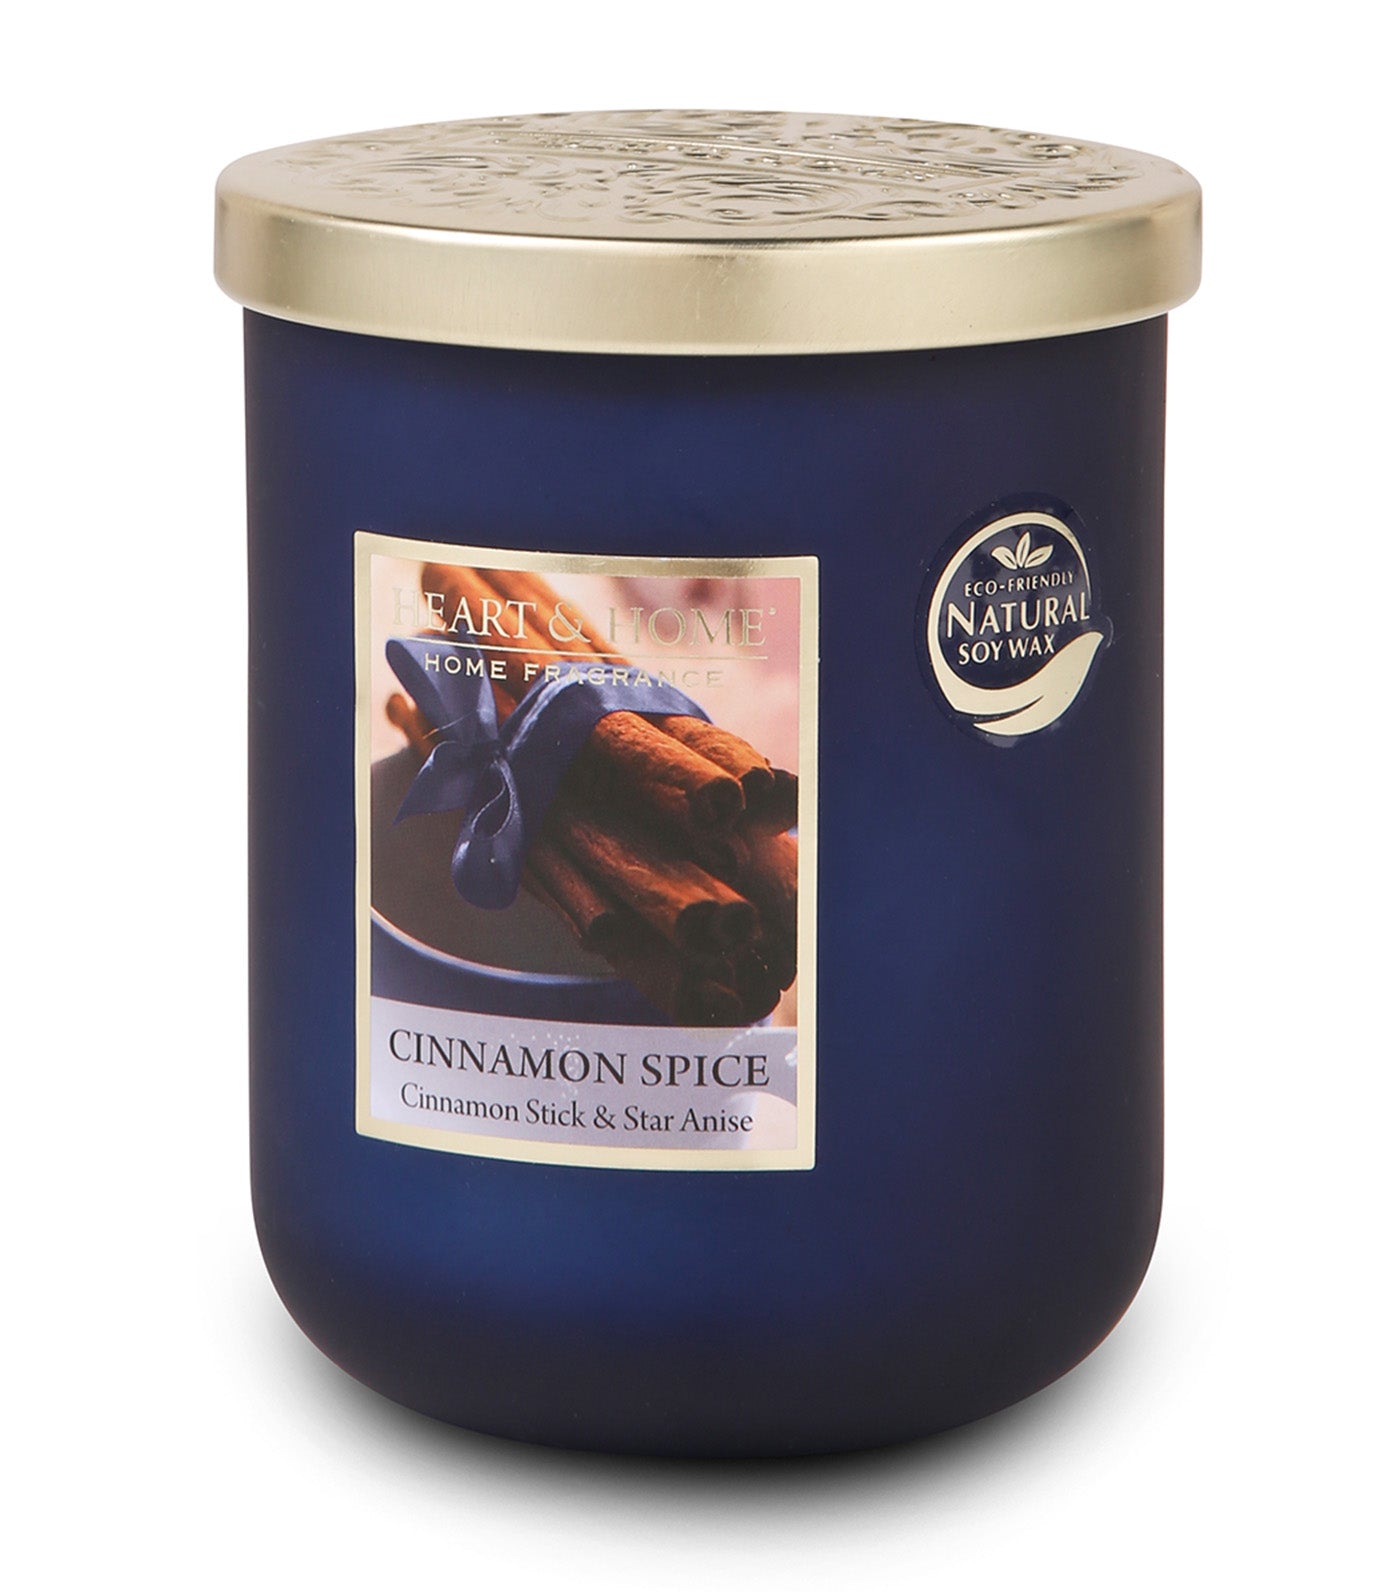 Cinnamon Spice Soy Candle